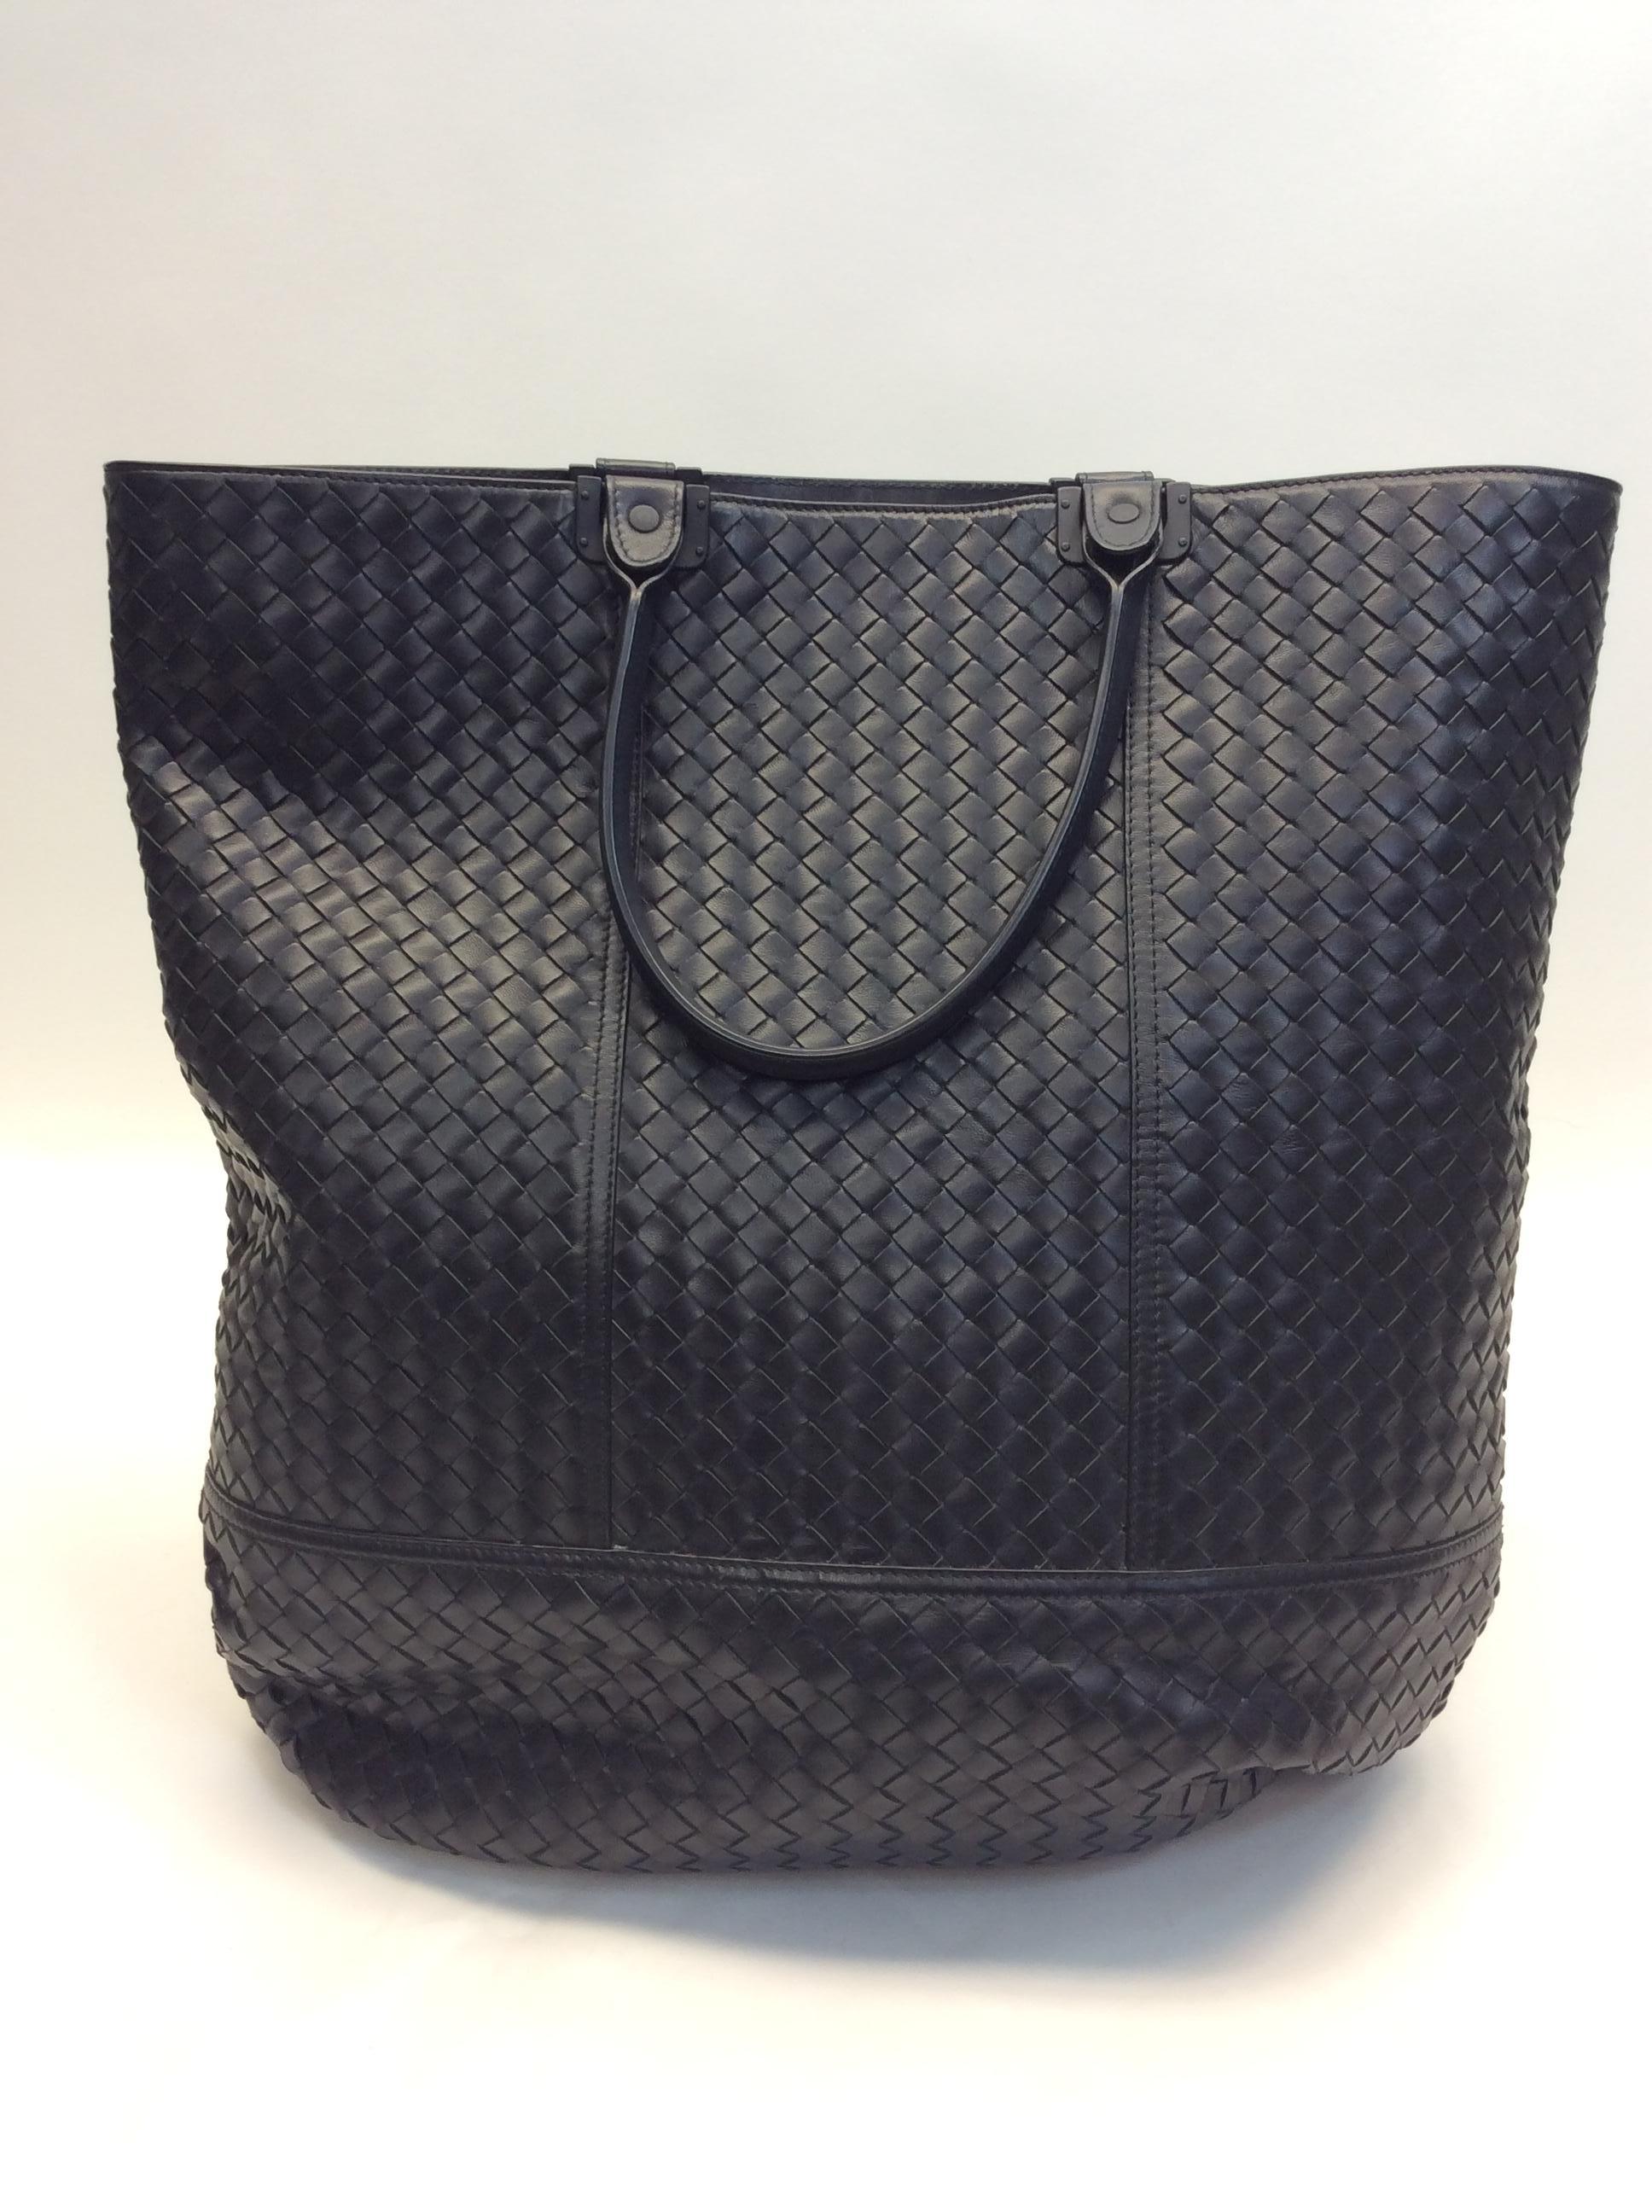 Bottega Large Black Leather Woven Tote In Excellent Condition For Sale In Narberth, PA